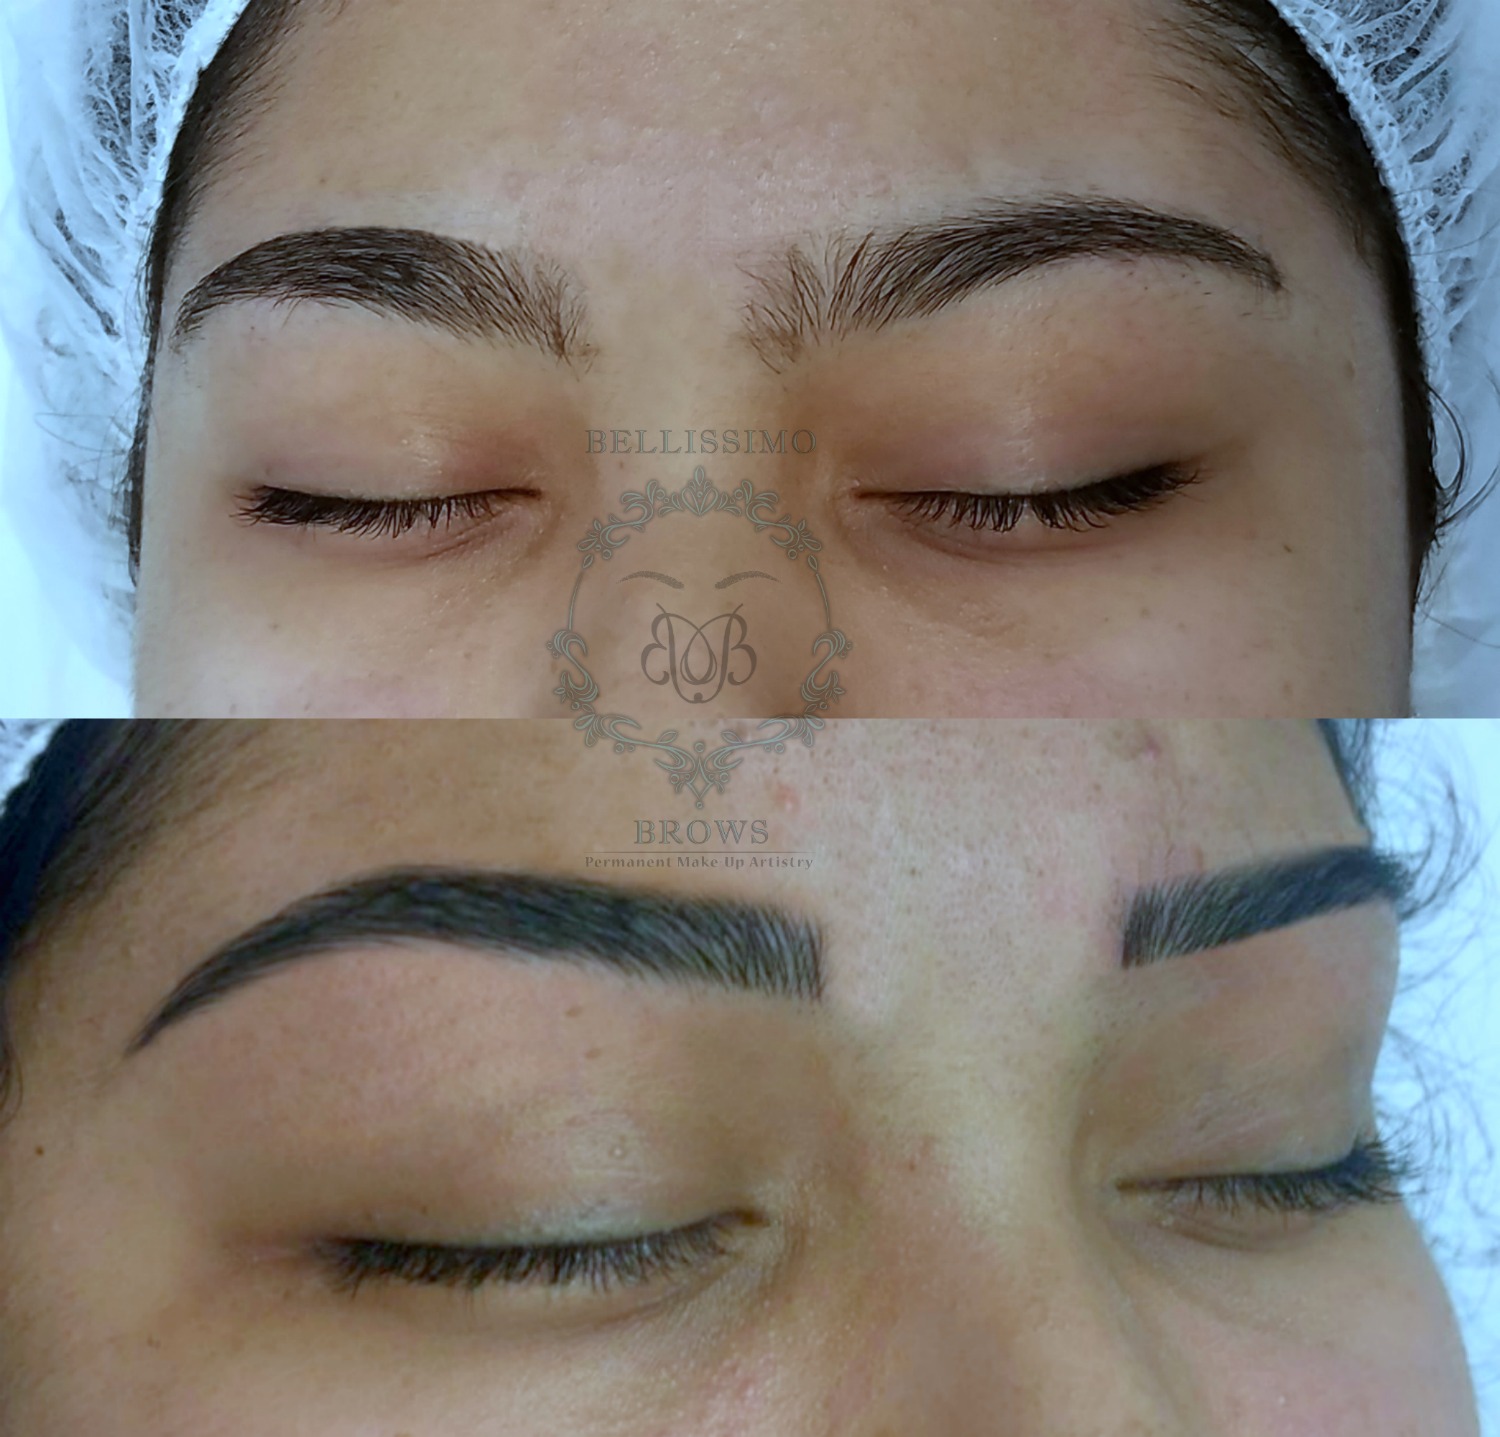 Check Out Our Clients Brows, Brows, Brows & Lash Liner - Bellissimo Brows